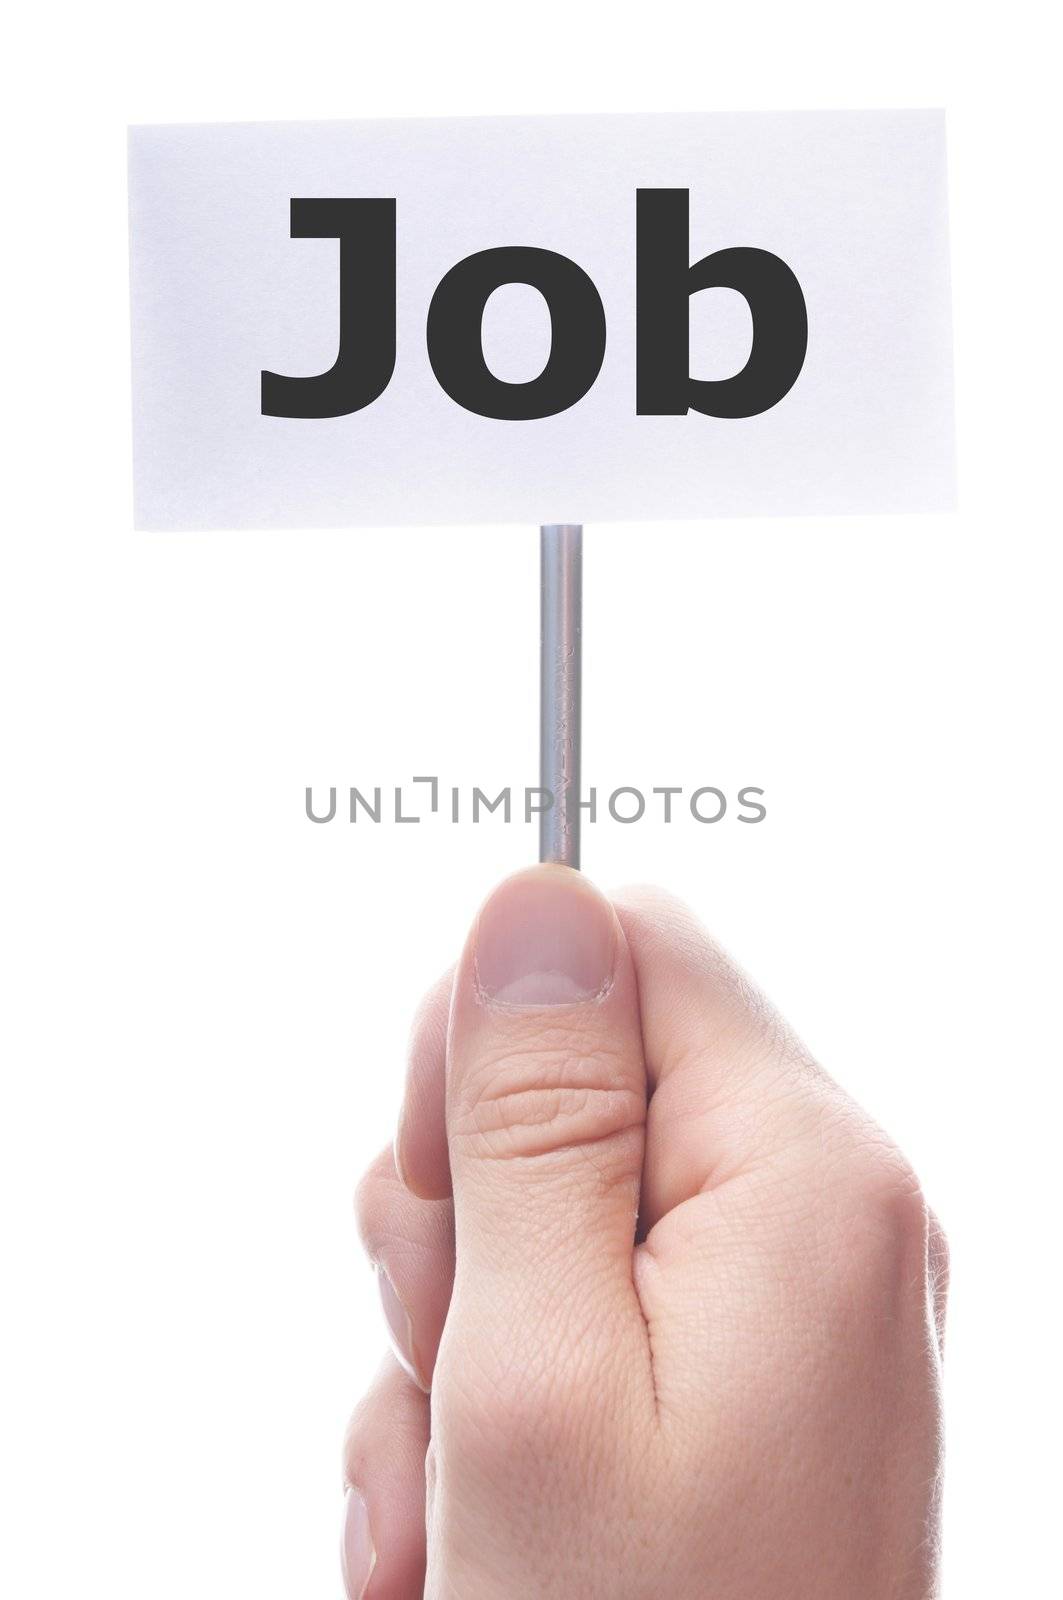 job work or unemployment concept with hand and paper